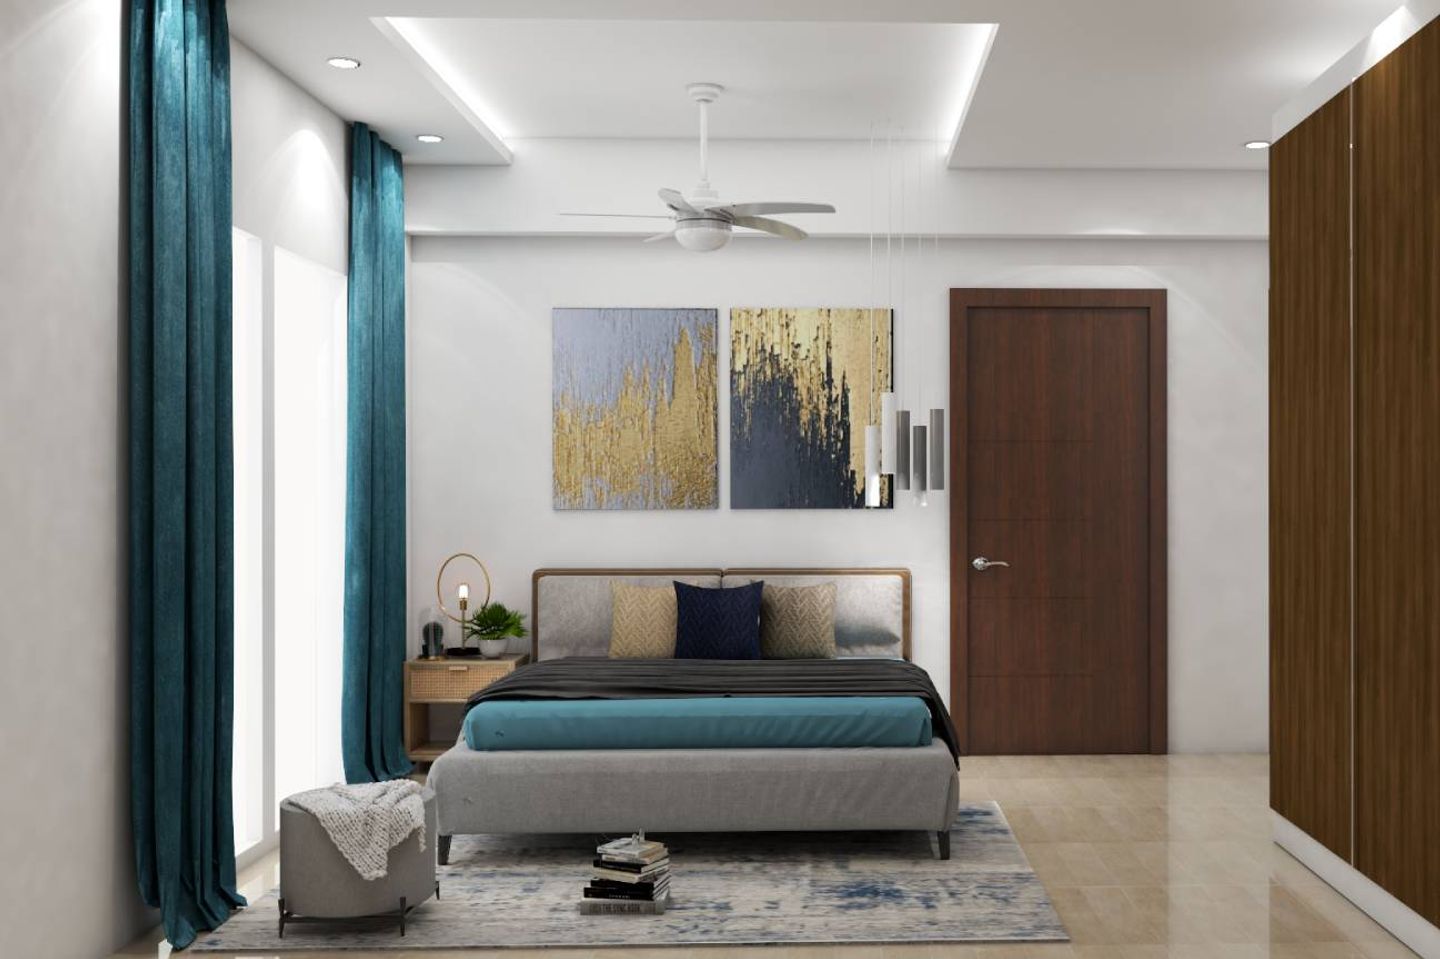 Modern false ceiling with white color temperature lighting and turquoise accents - Livspavce